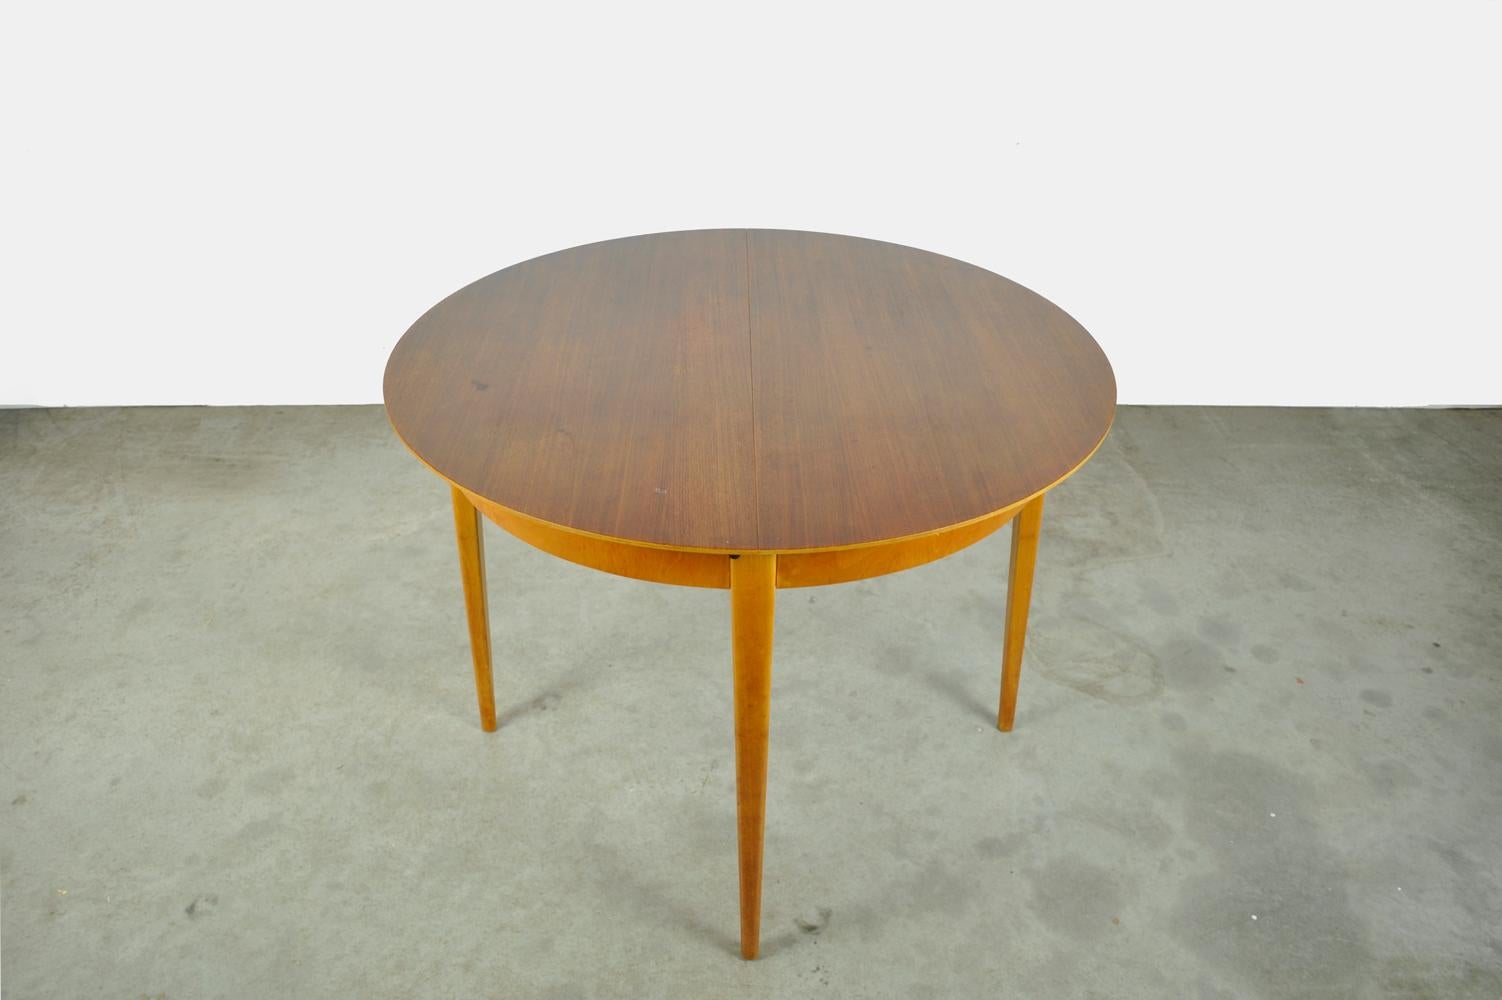 Scandinavian Modern Birch extendable 4-6 persons dining table, TB35 by Cees Braakman, Pastoe, 1950s